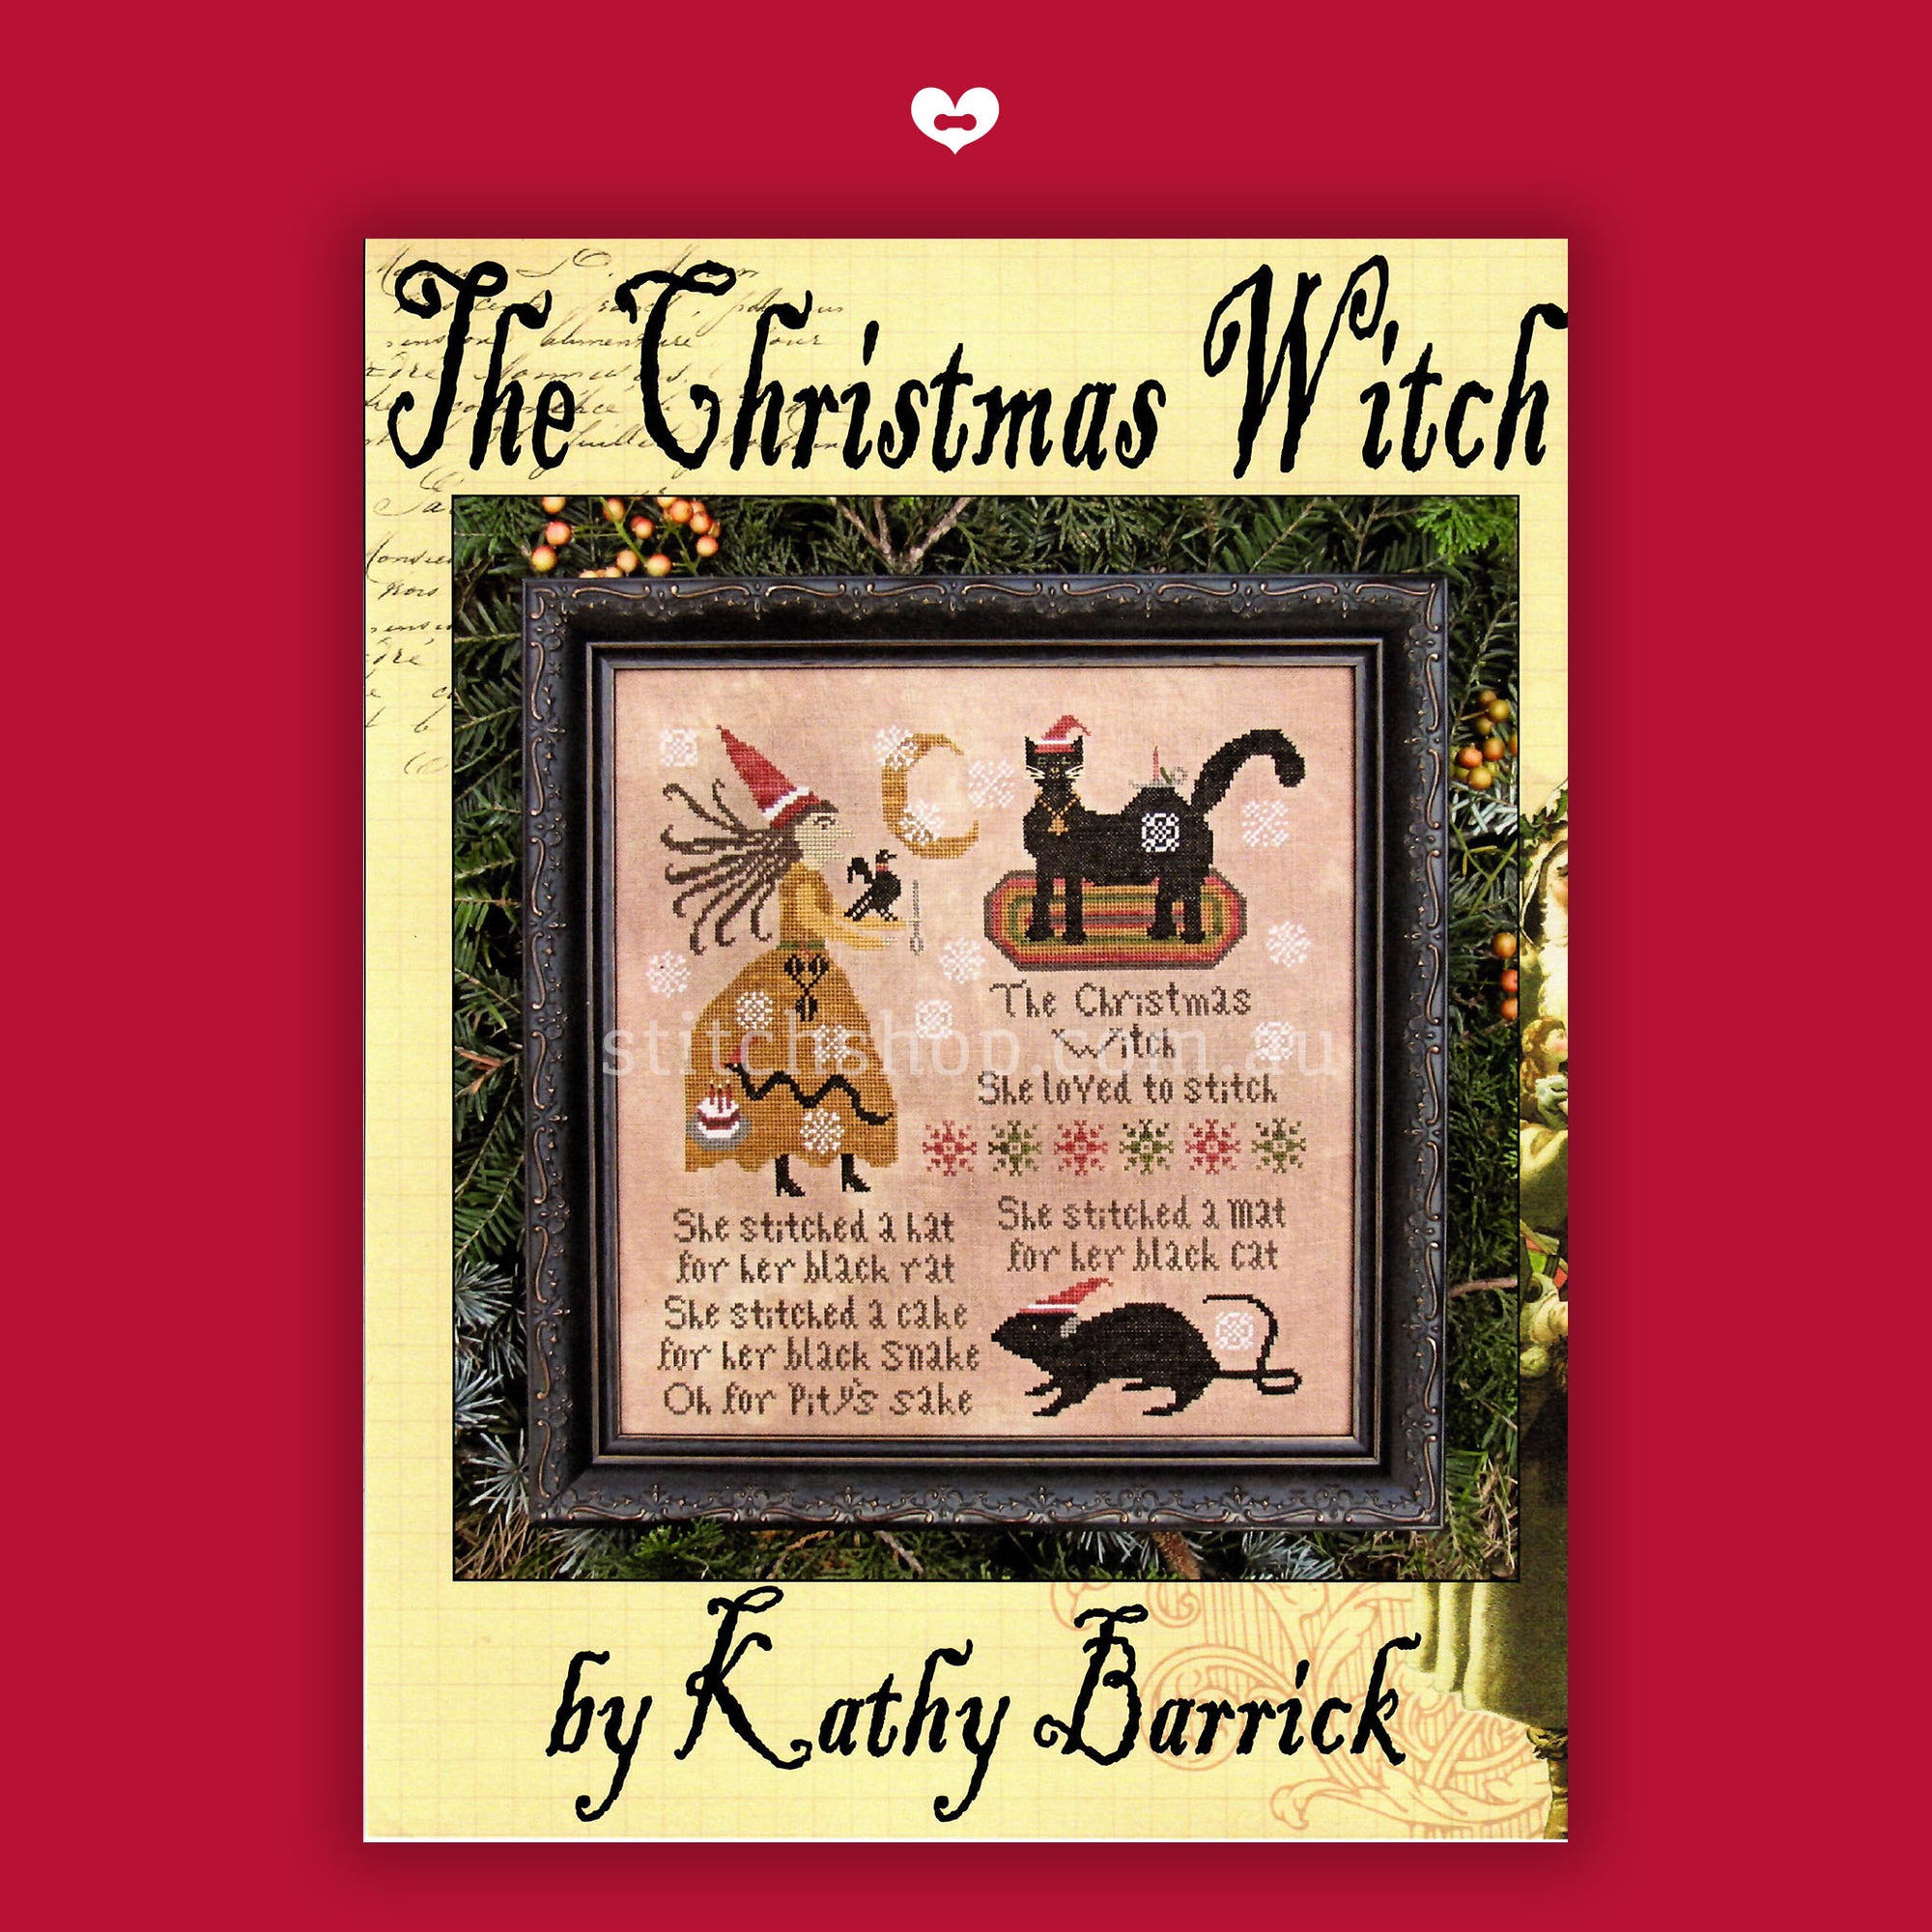 The Christmas Witch